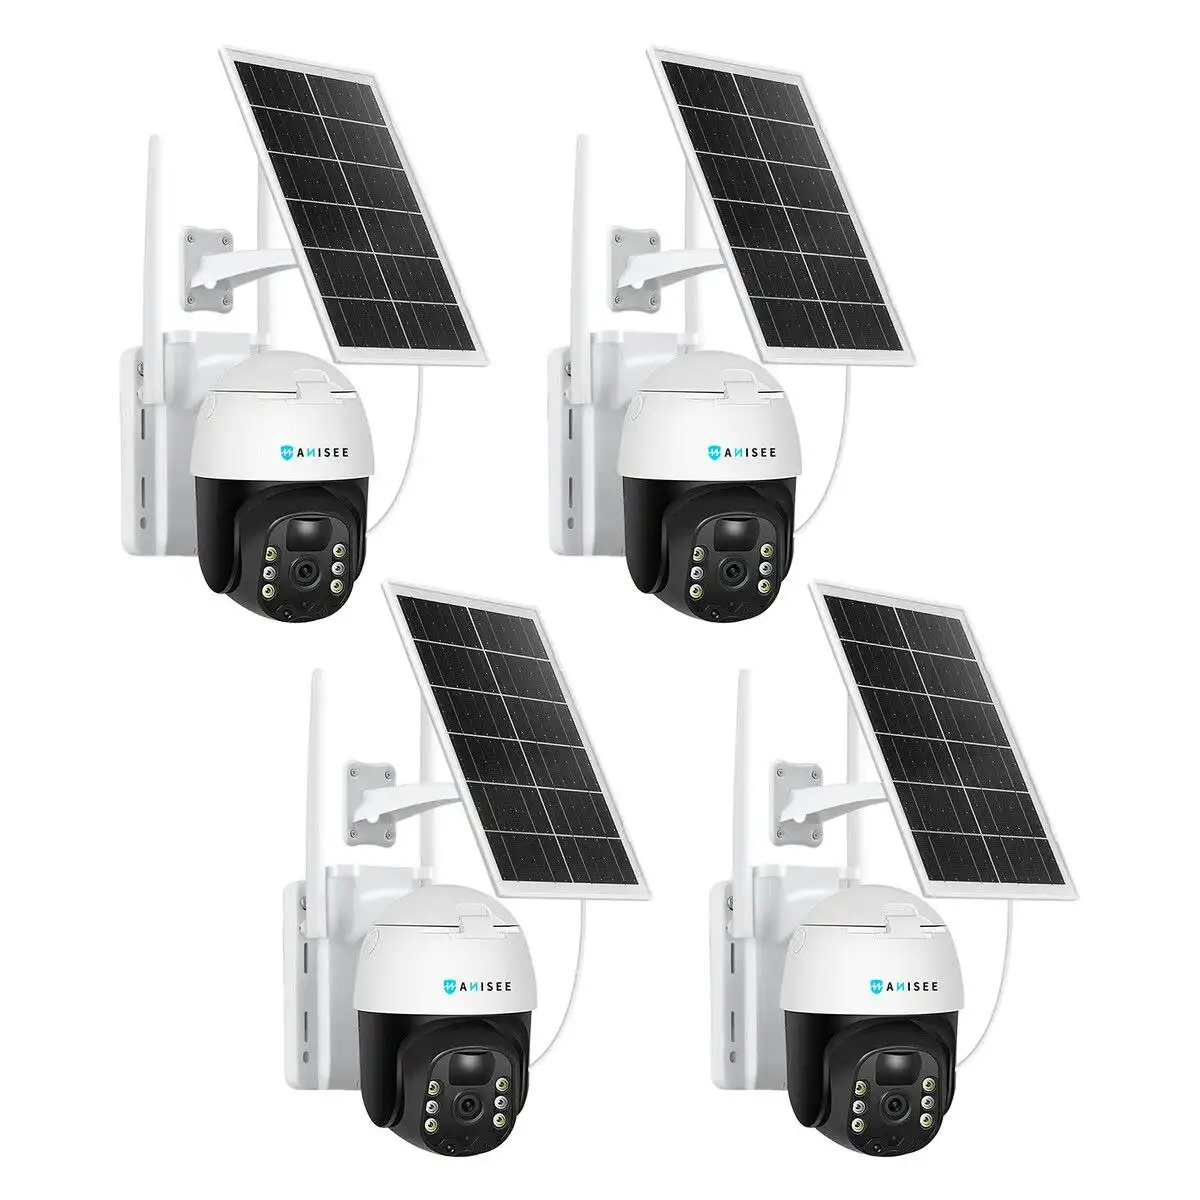 Anisee Solar Security Camerax4 Wireless Outdoor CCTV WiFi Home Surveillance System 4MP PTZ Remote 2 Way Audio Color Night Vision